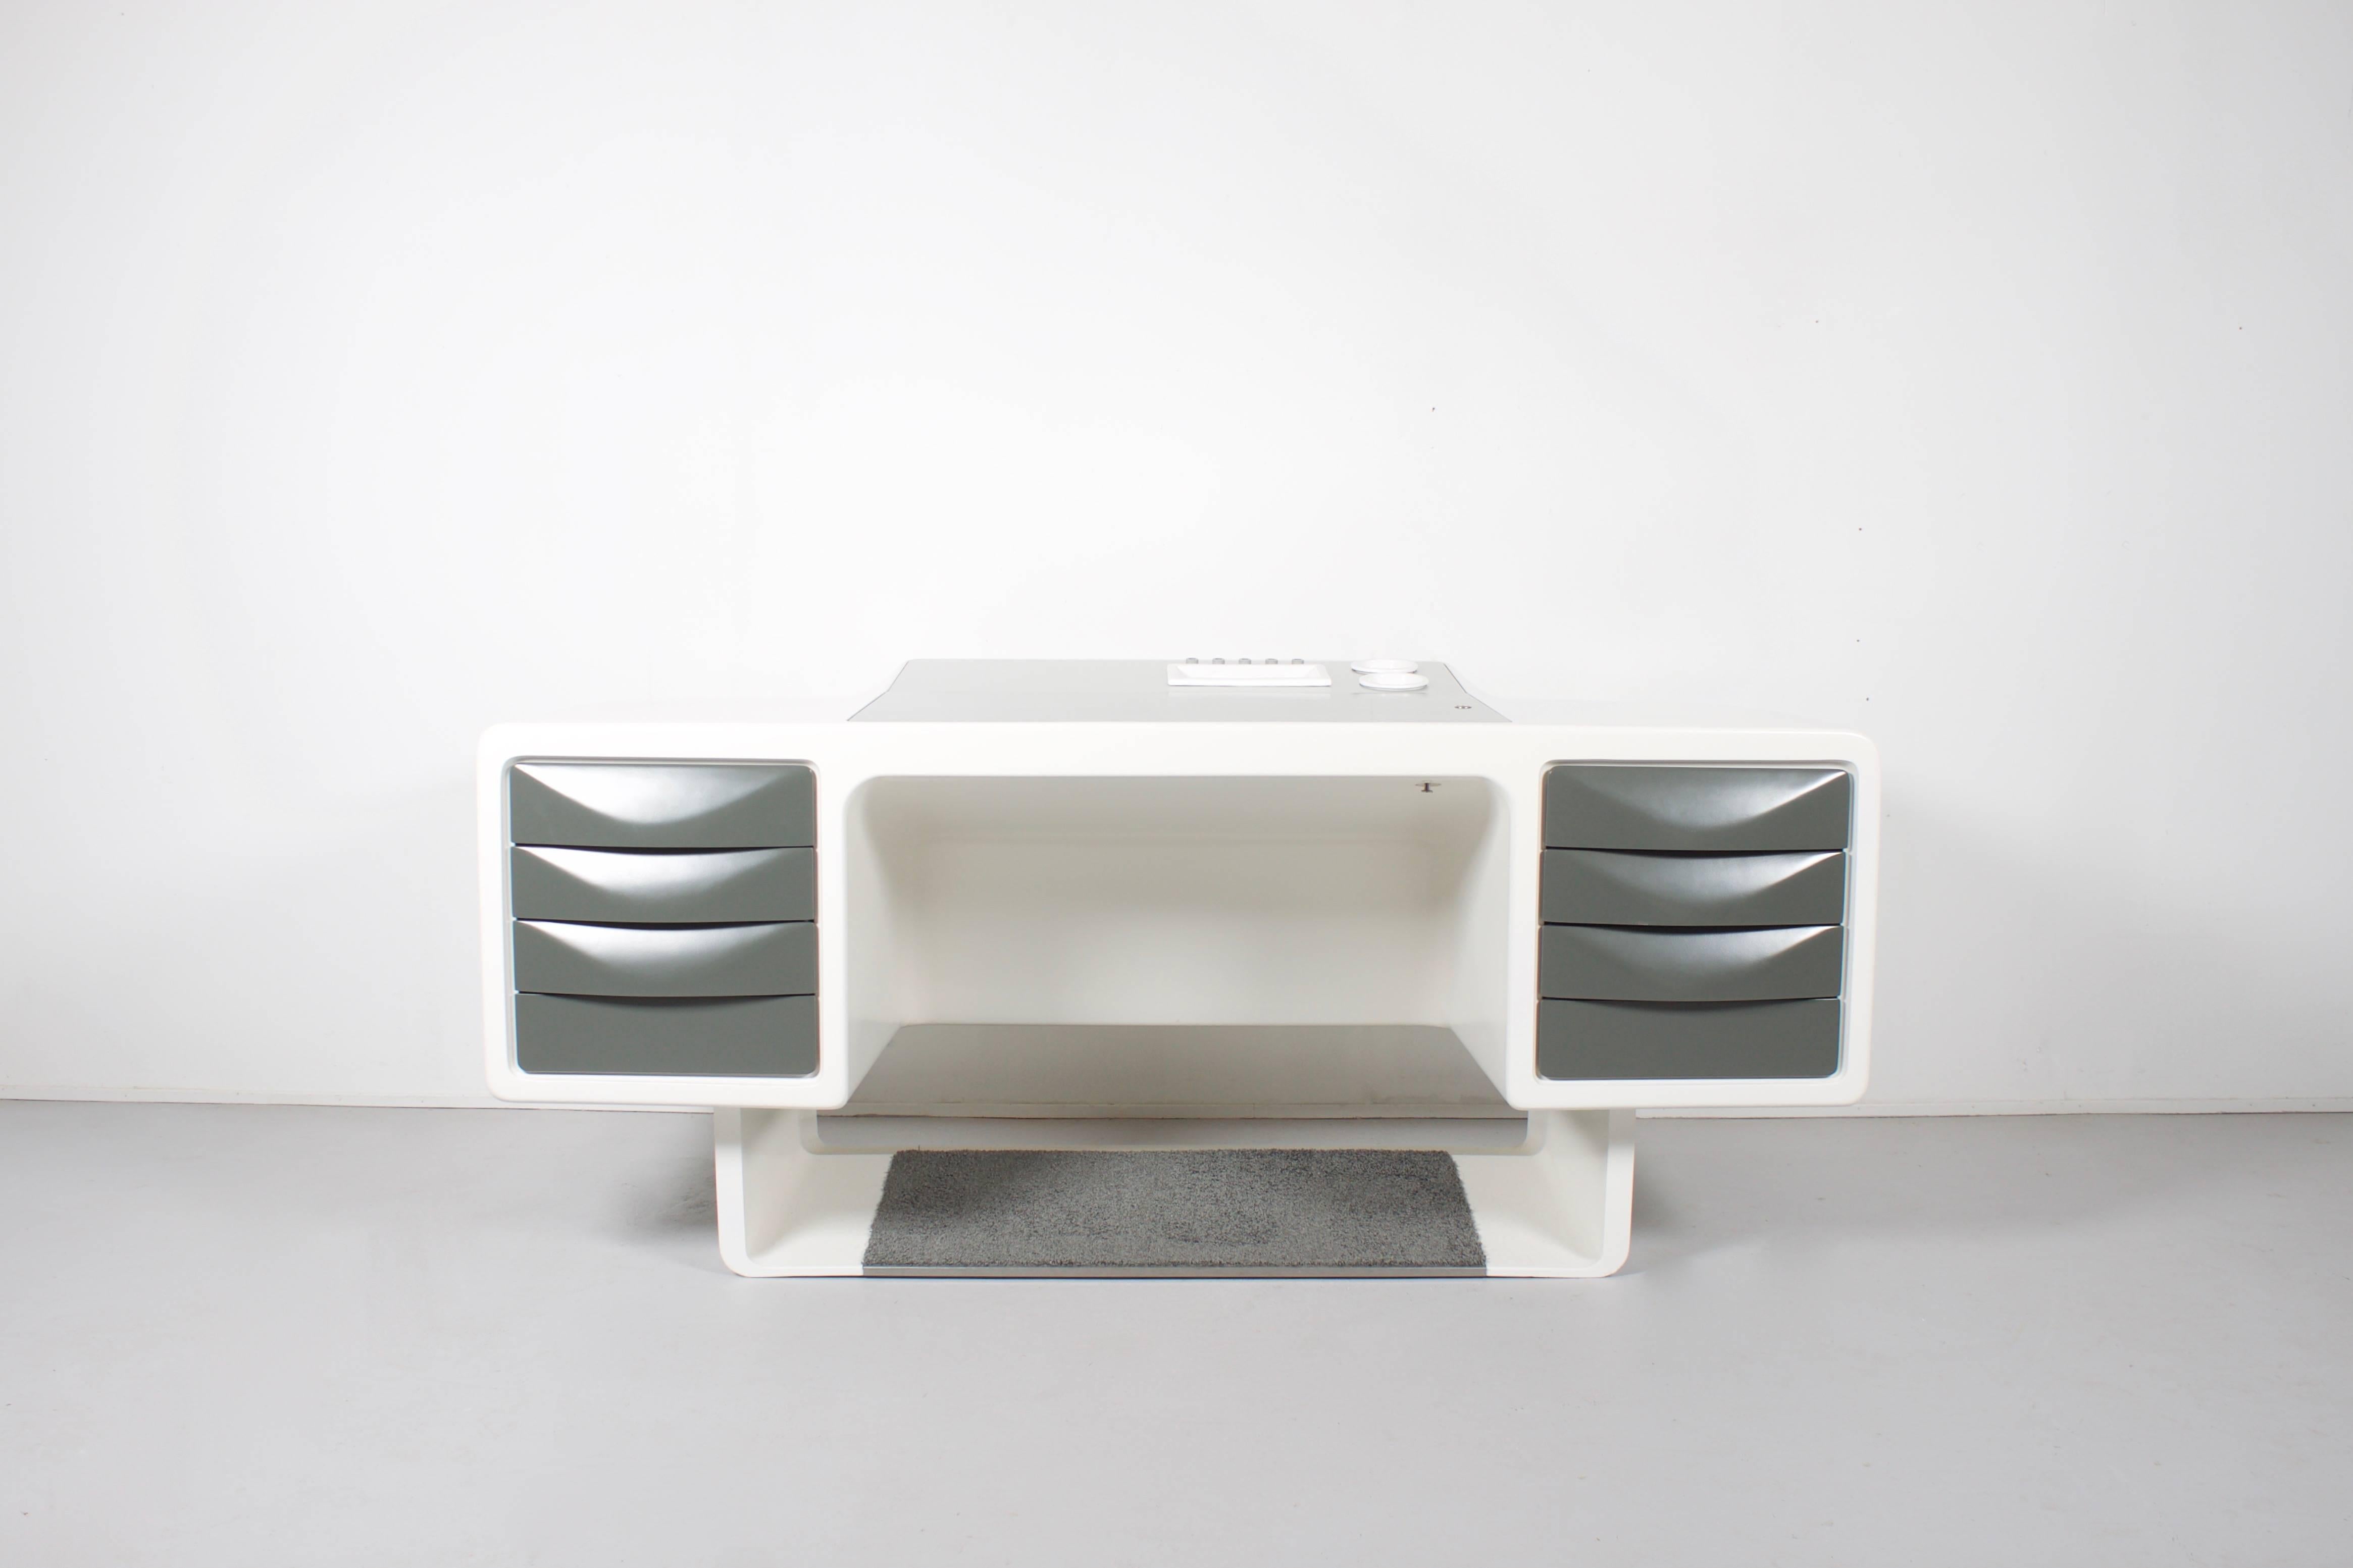 Beautiful Space Age directors desk by Ernest Igl for Wilhelm Werndl

Completely restored, in very good condition.

Body made of molded fiberglass, lacquered white.

Carved wood drawers and writing surface in anthracite.

Aluminum panel with